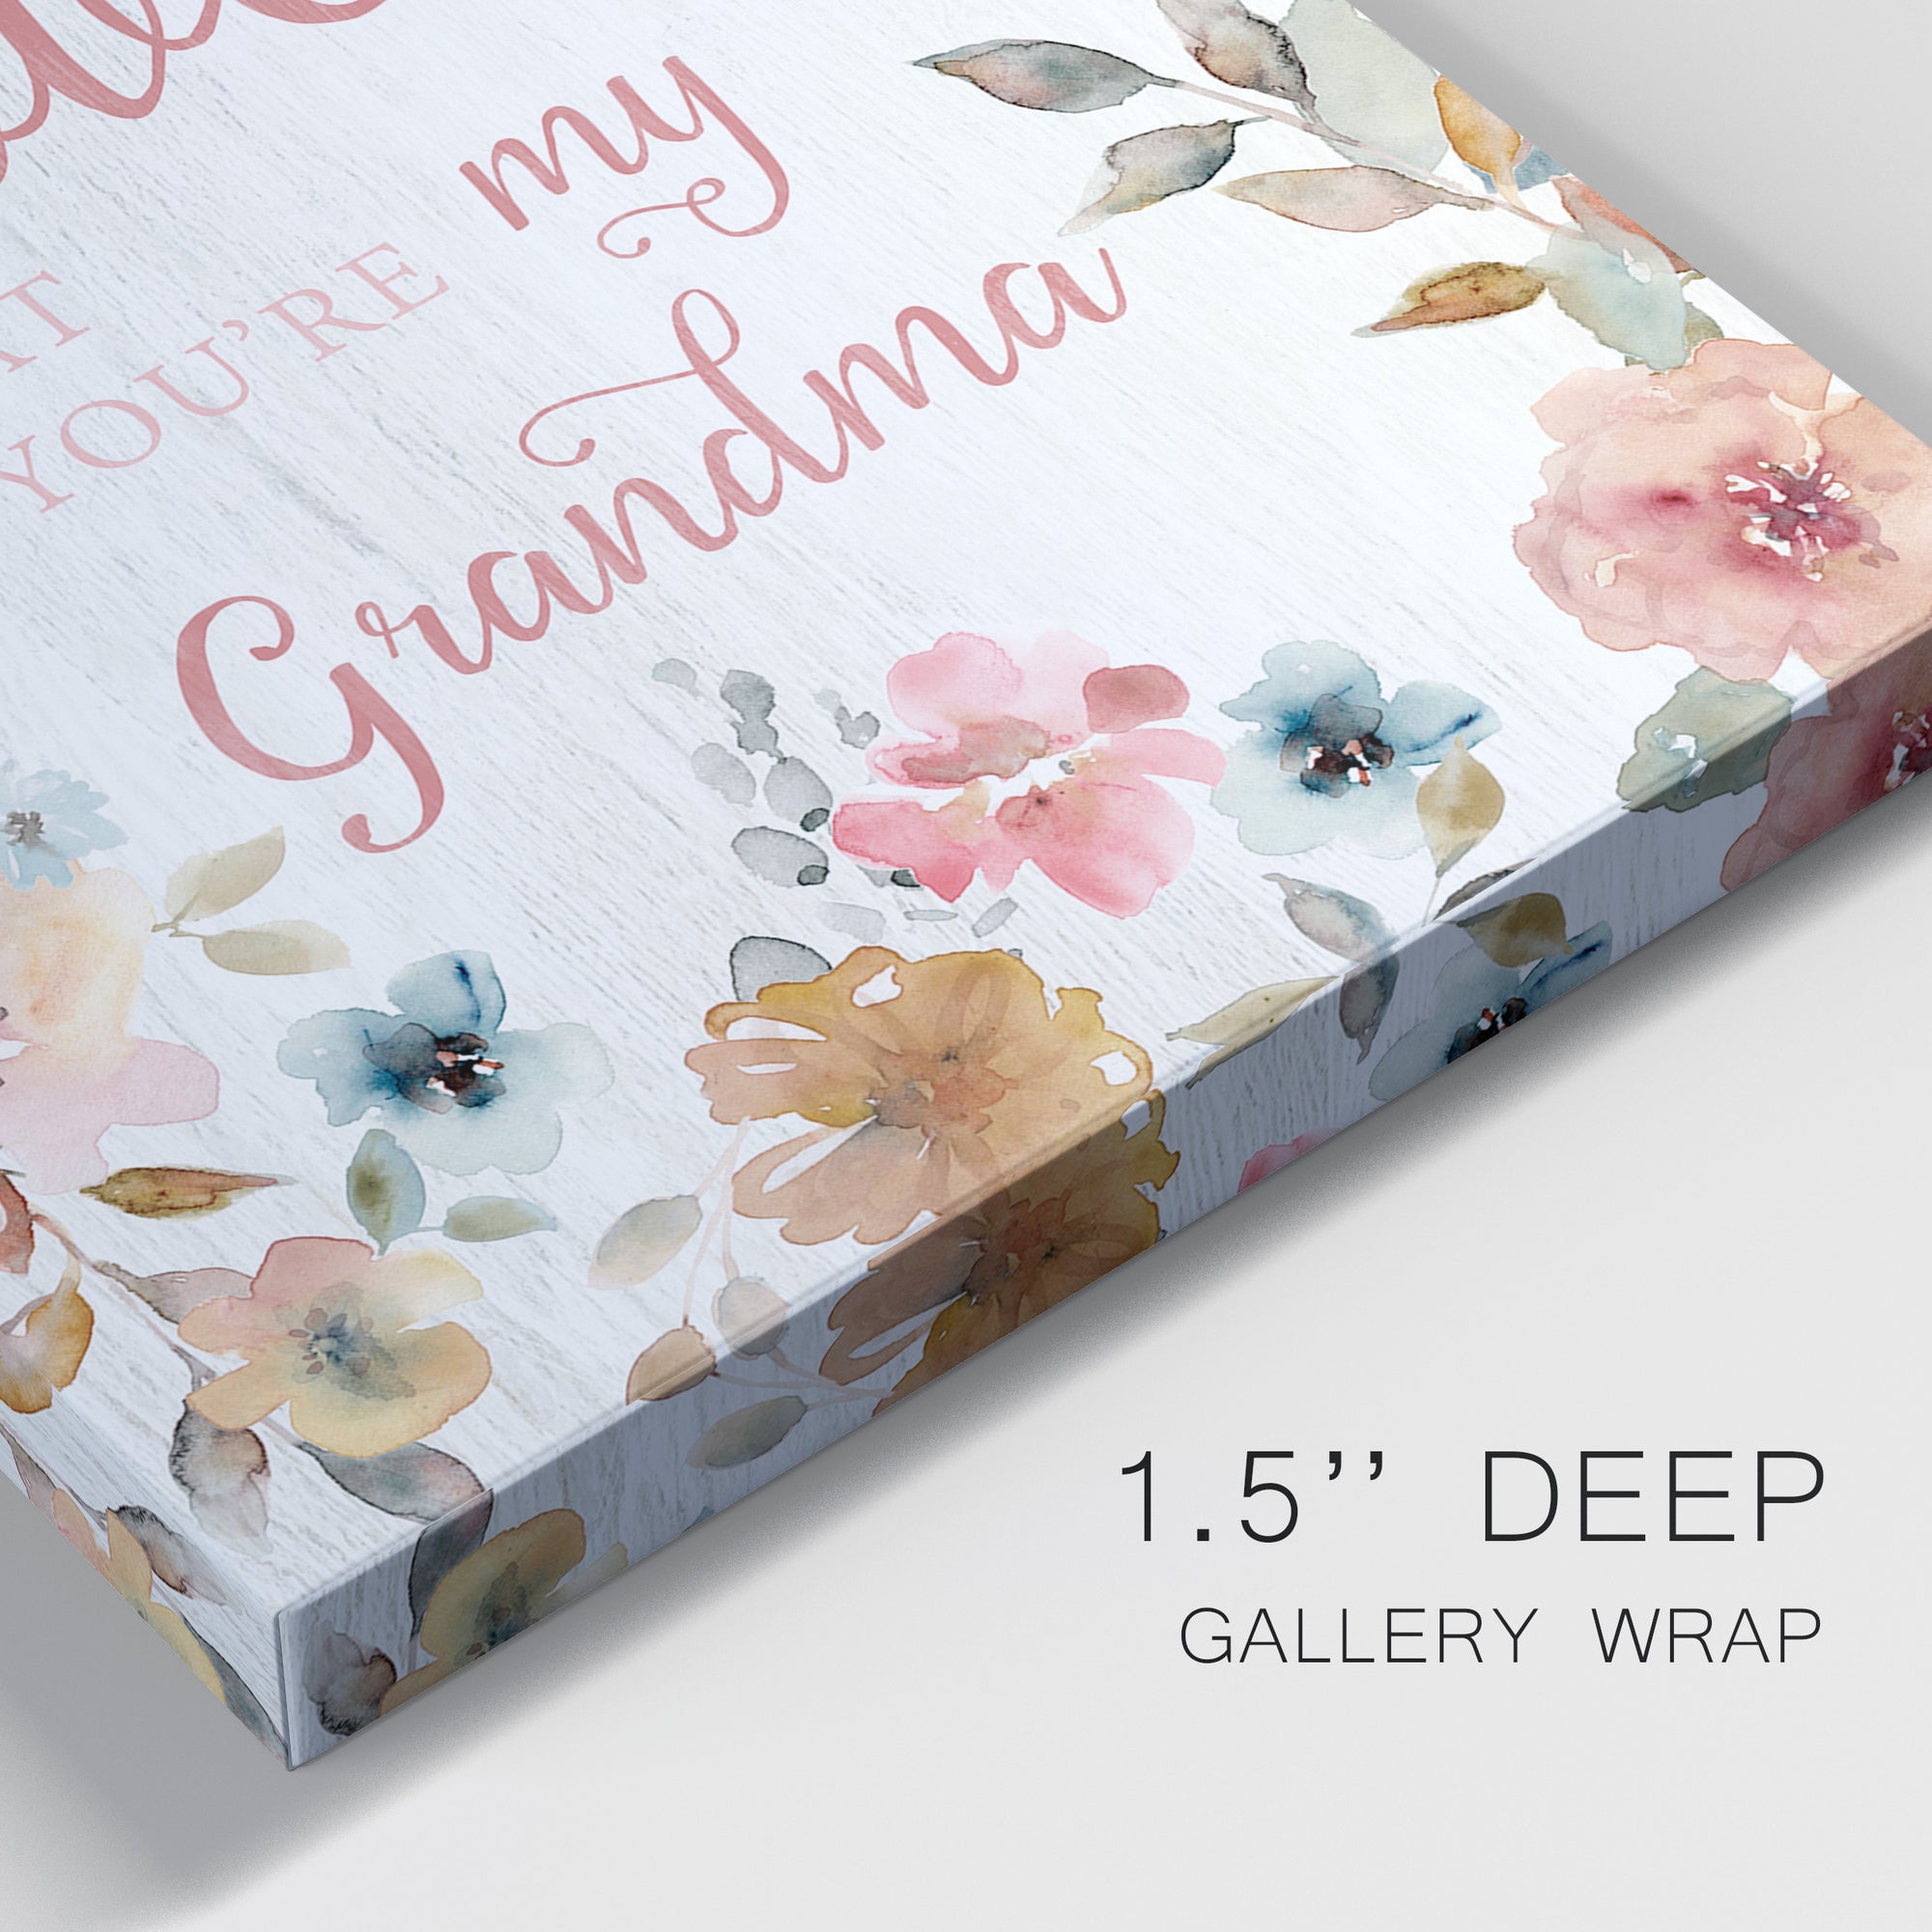 Love Grandma Premium Gallery Wrapped Canvas - Ready to Hang - Set of 2 - 8 x 12 Each